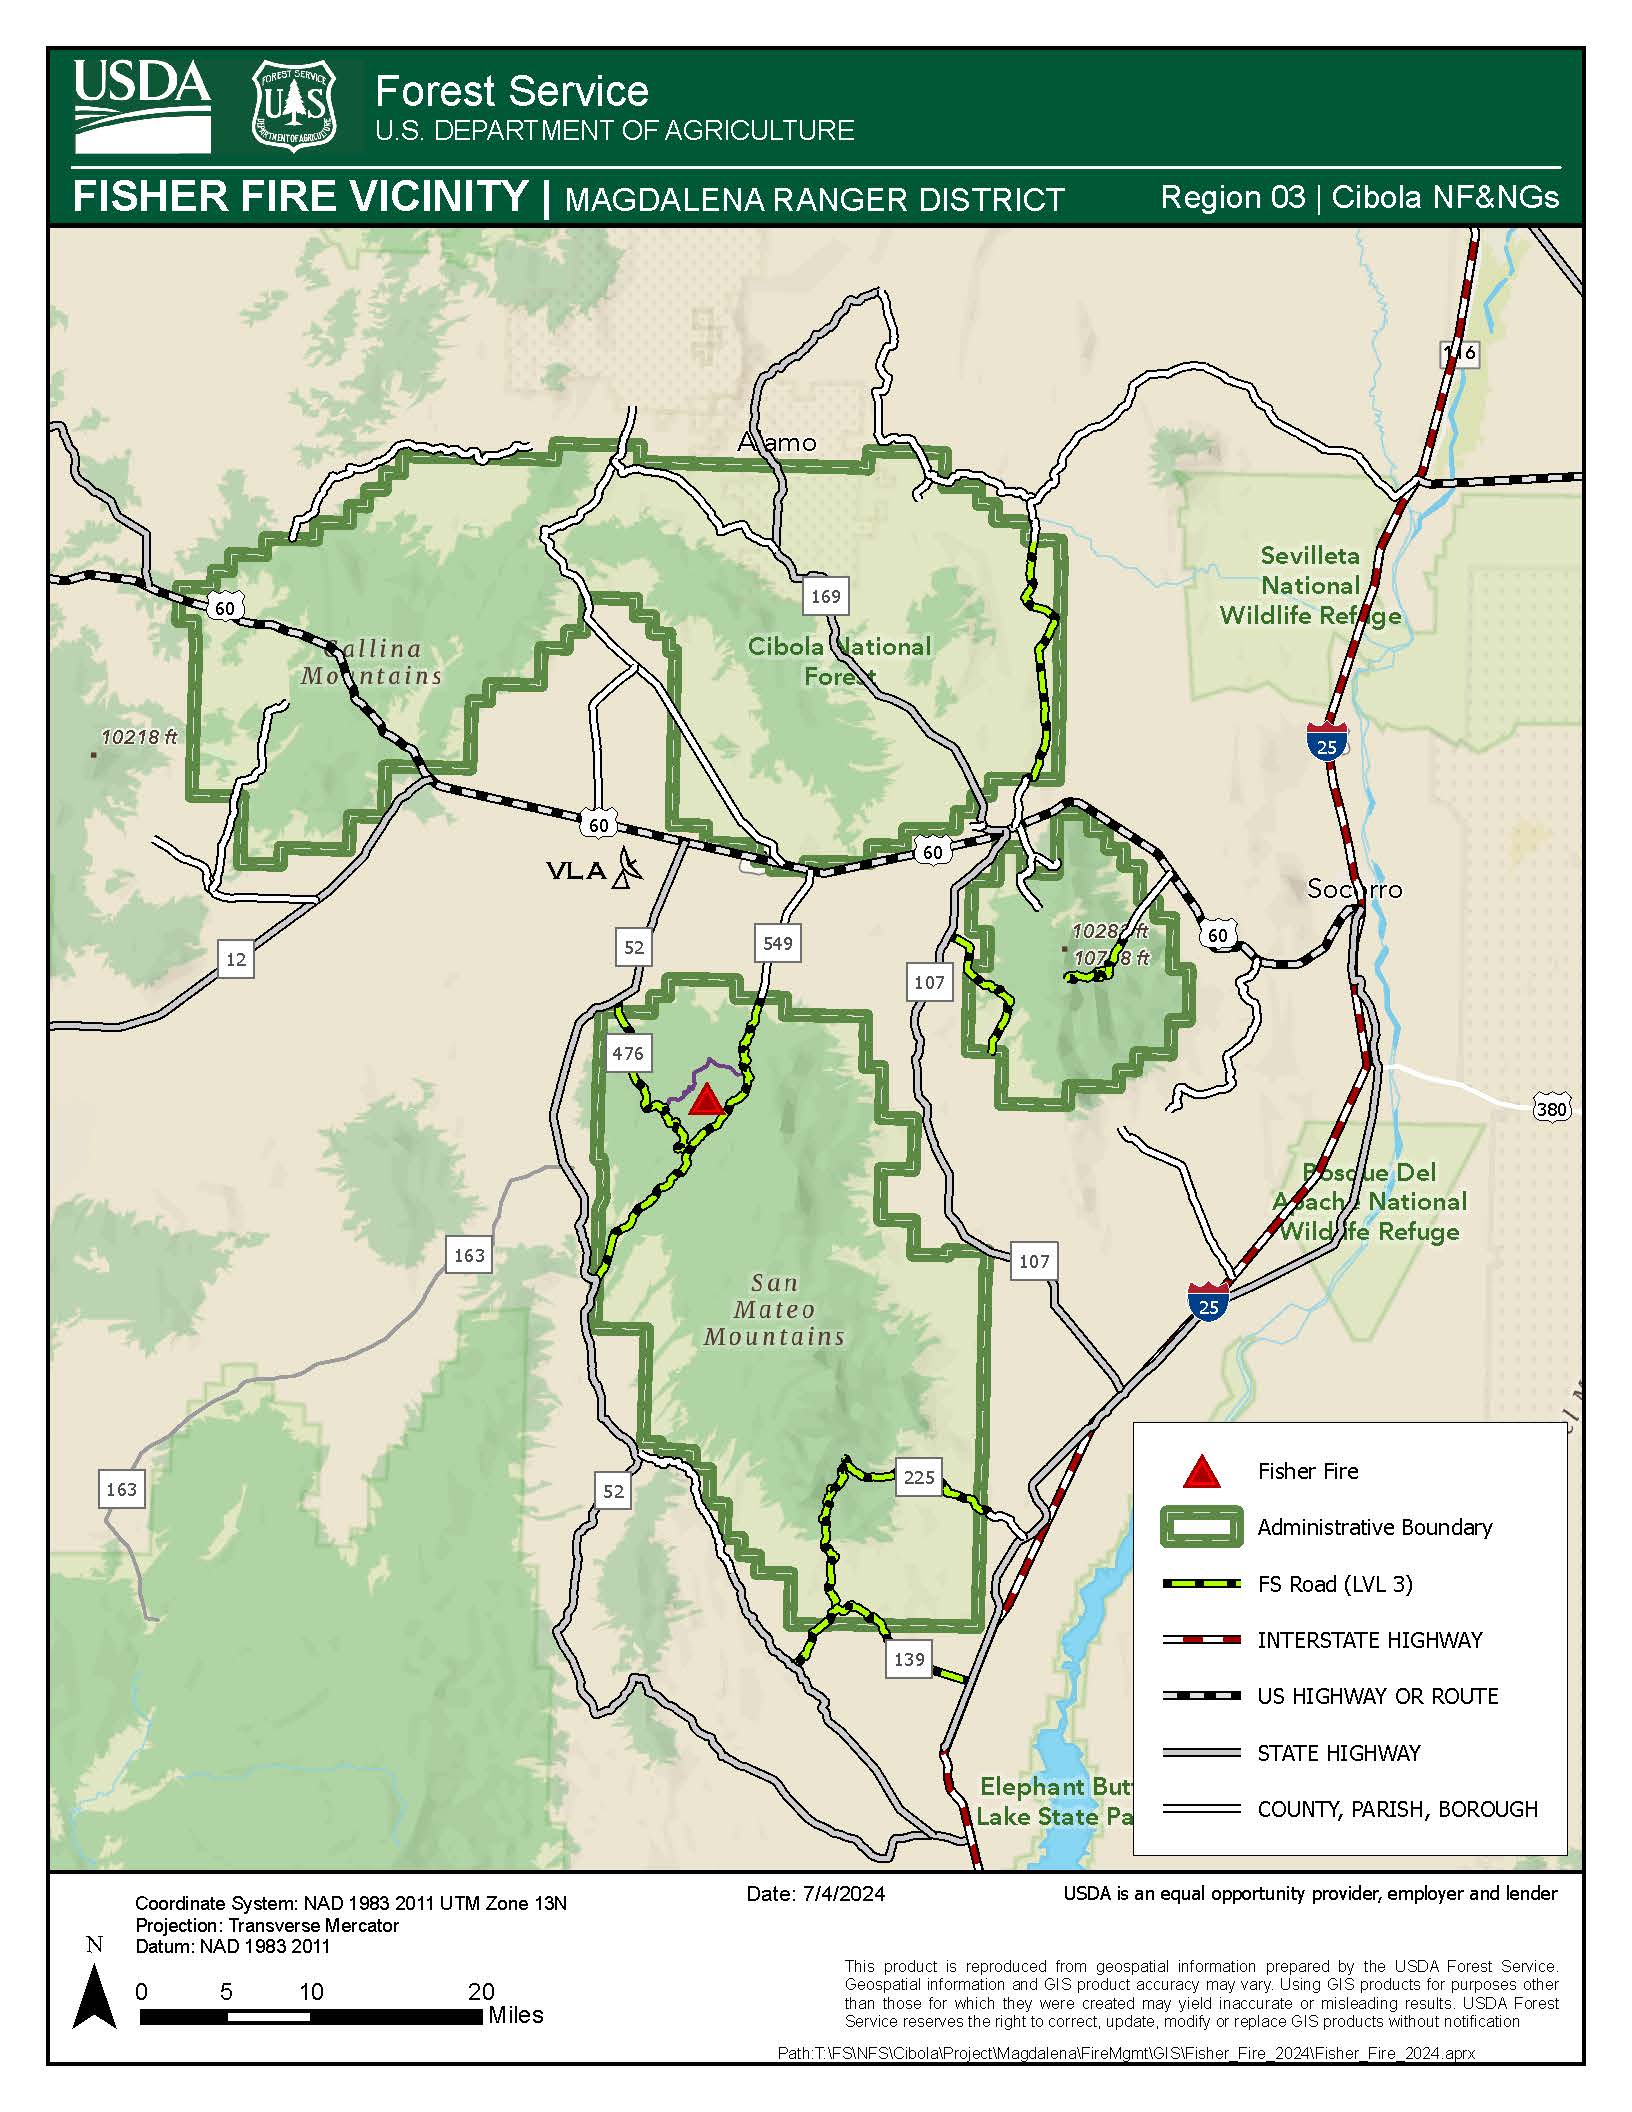 

						202407 Magdalena RD Fisher Fire Vicinity Map.jpg
			